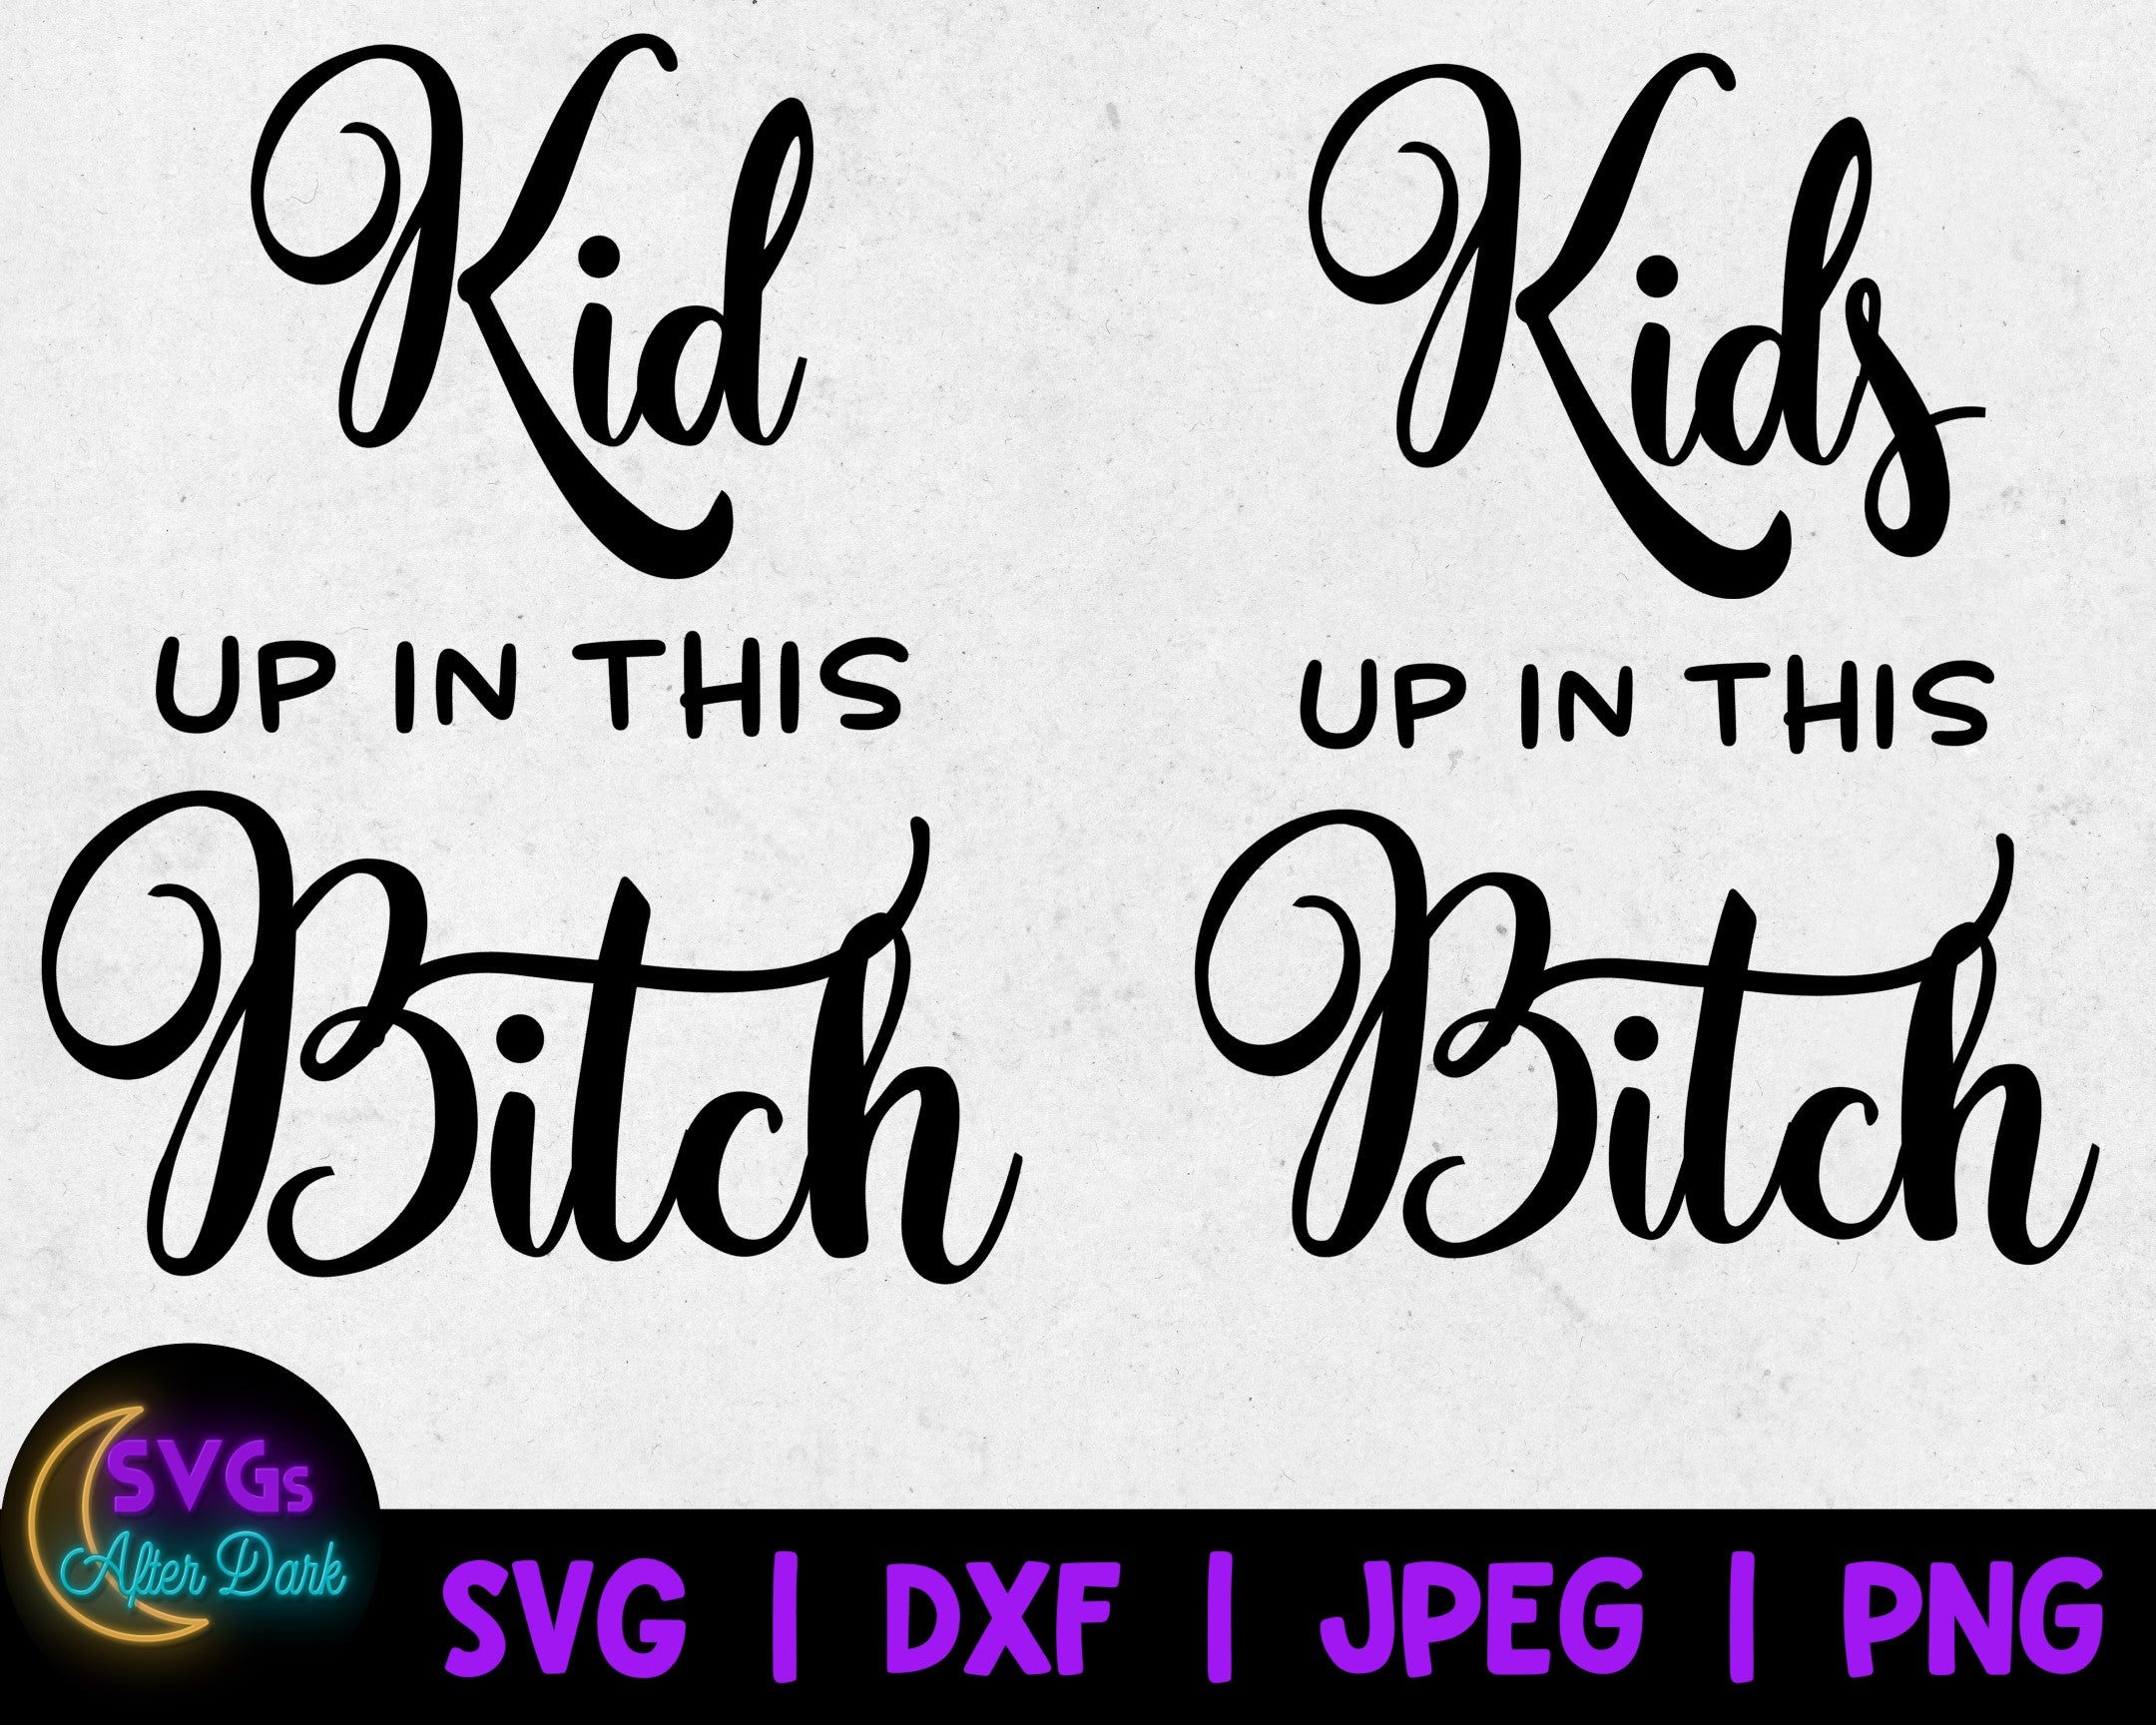 Kids up in this Bitch SVG - Funny Car SVG - Funny Mom SVG